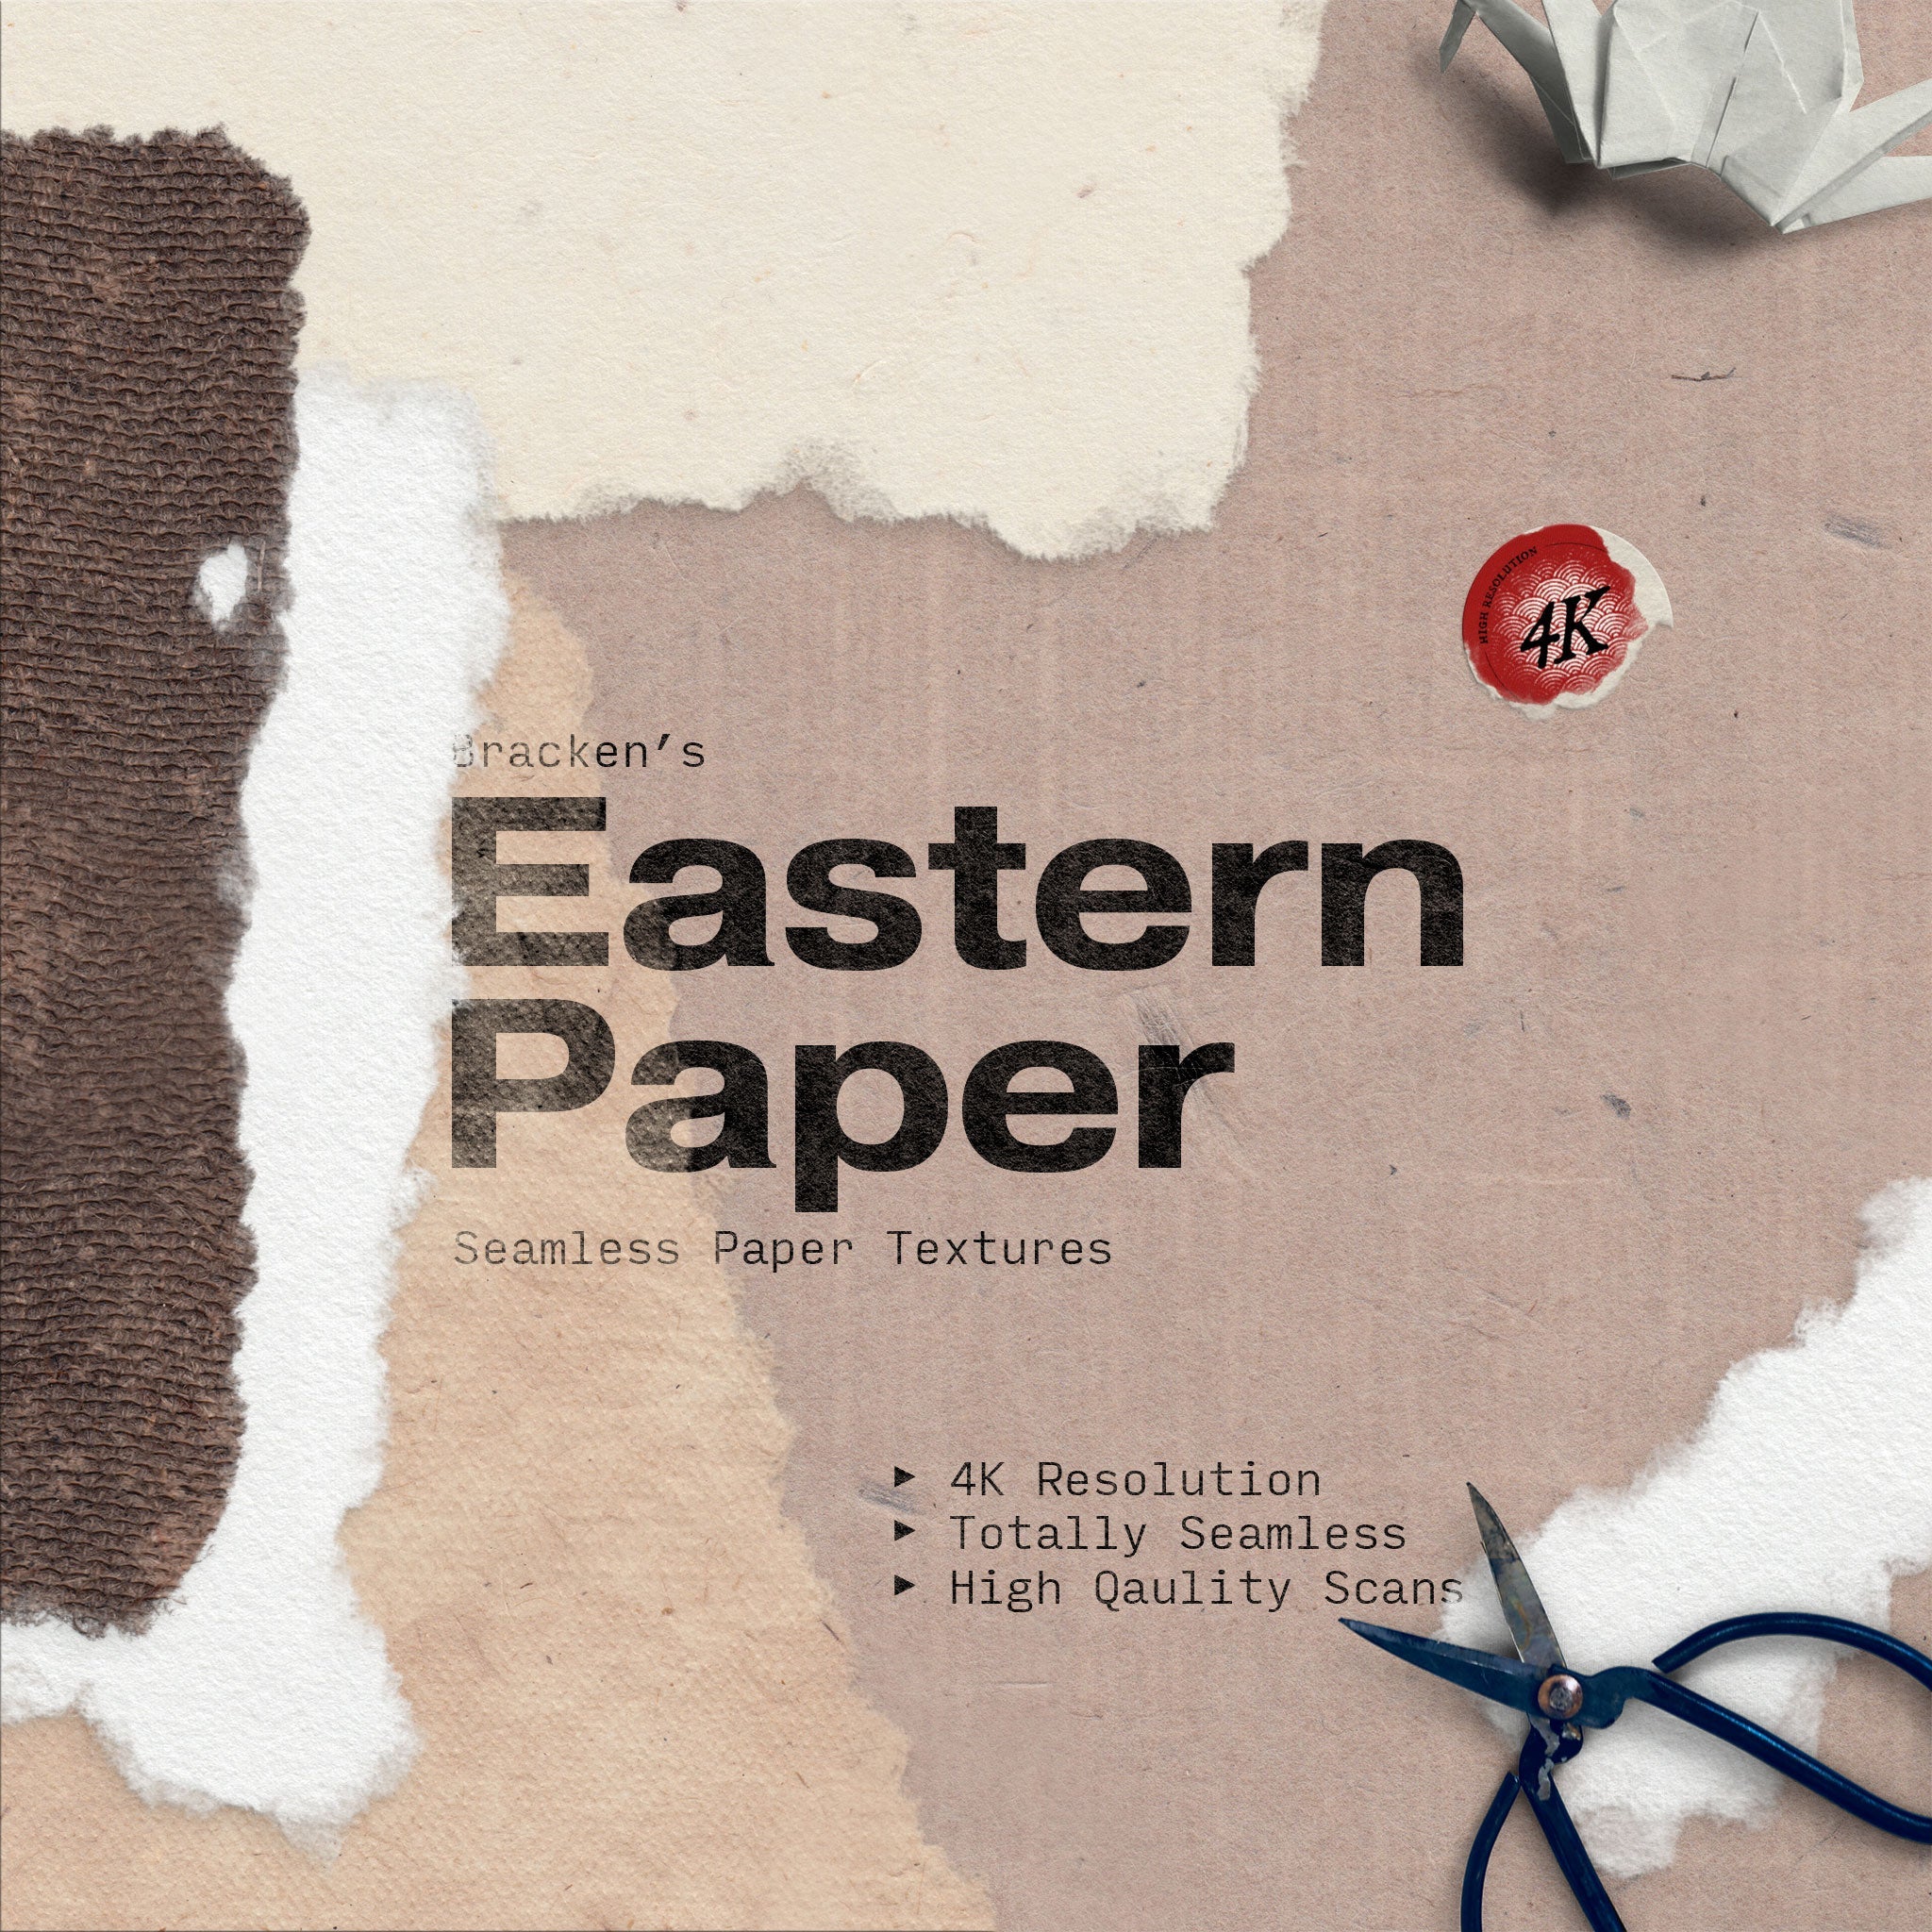 Make from scratch! The texture of the Japanese Paper in Photoshop